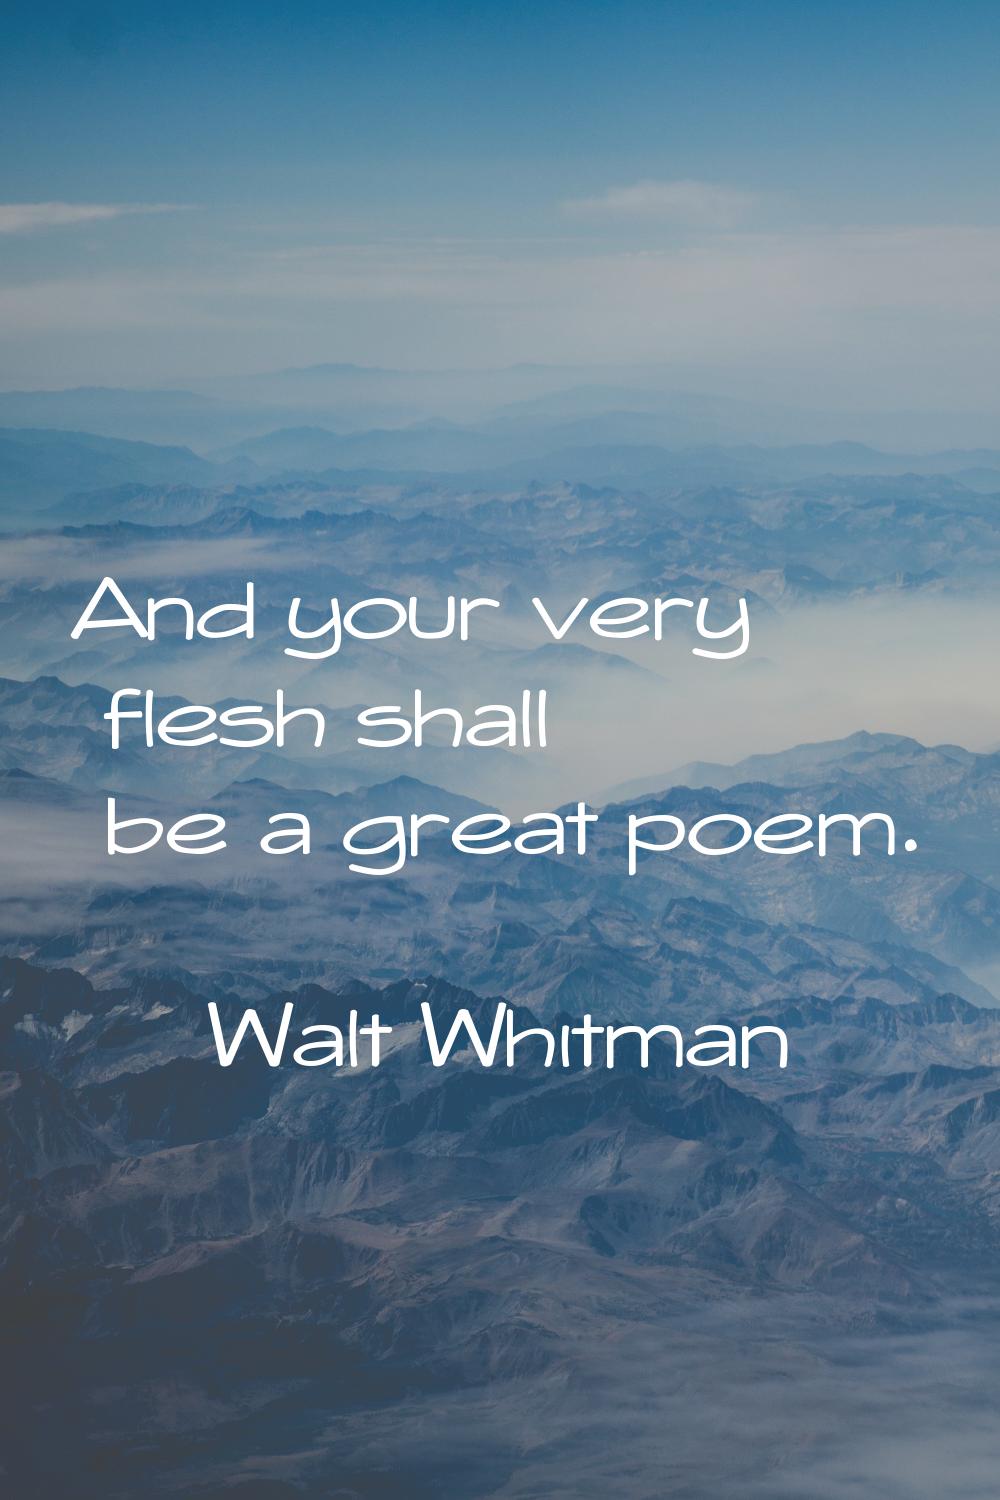 And your very flesh shall be a great poem.